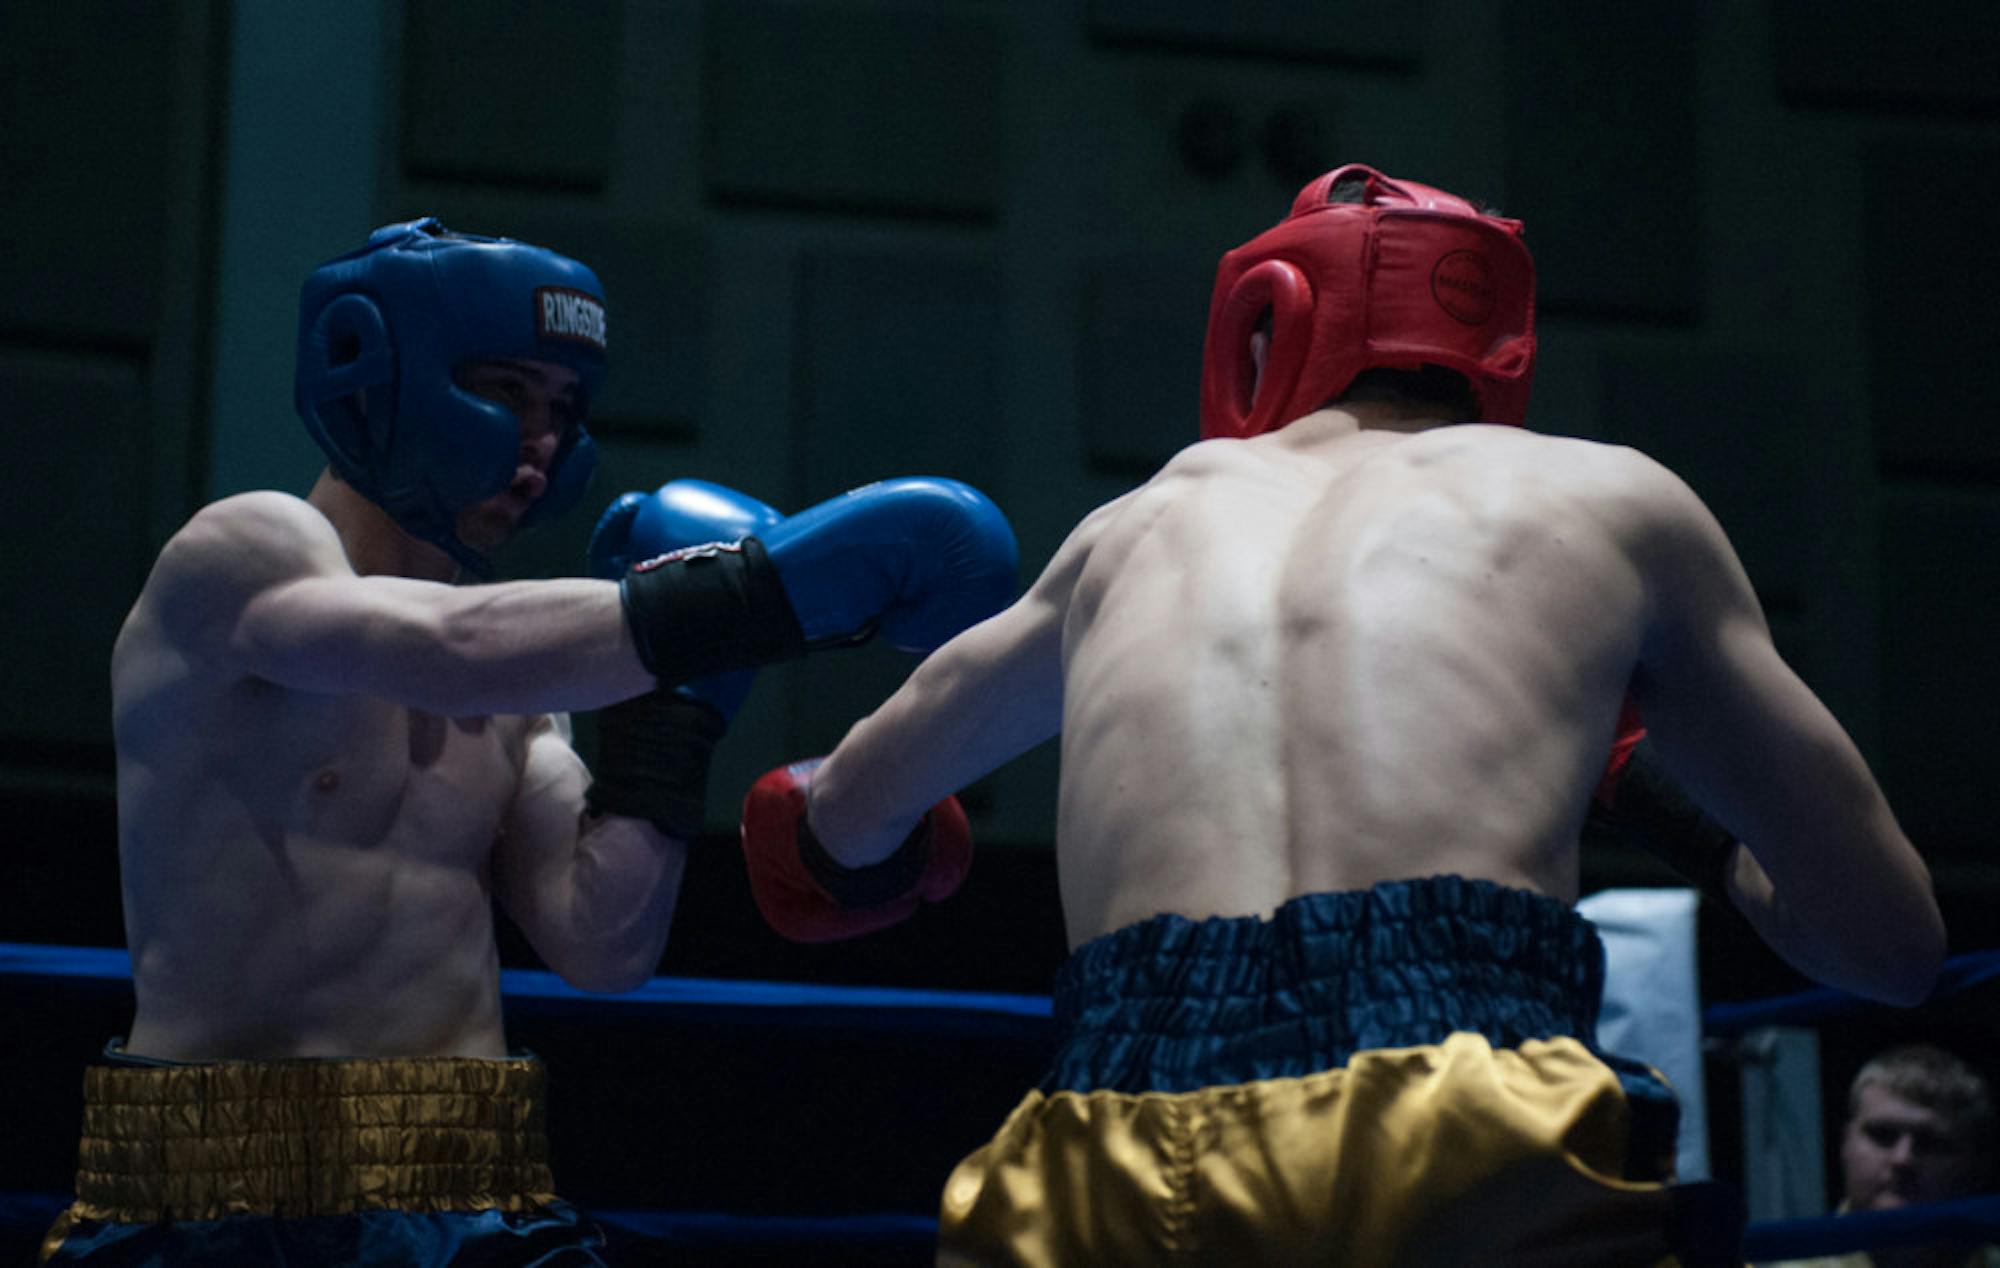 Senior captain Garrity McOsker, left, fights sophomore Joe Sulentic during Tuesday night’s Bengal Bouts semifinals at Joyce Fieldhouse. McOsker is a two-time defending Bengal Bouts champion and has ambitions of a professional career in boxing after leaving Notre Dame.